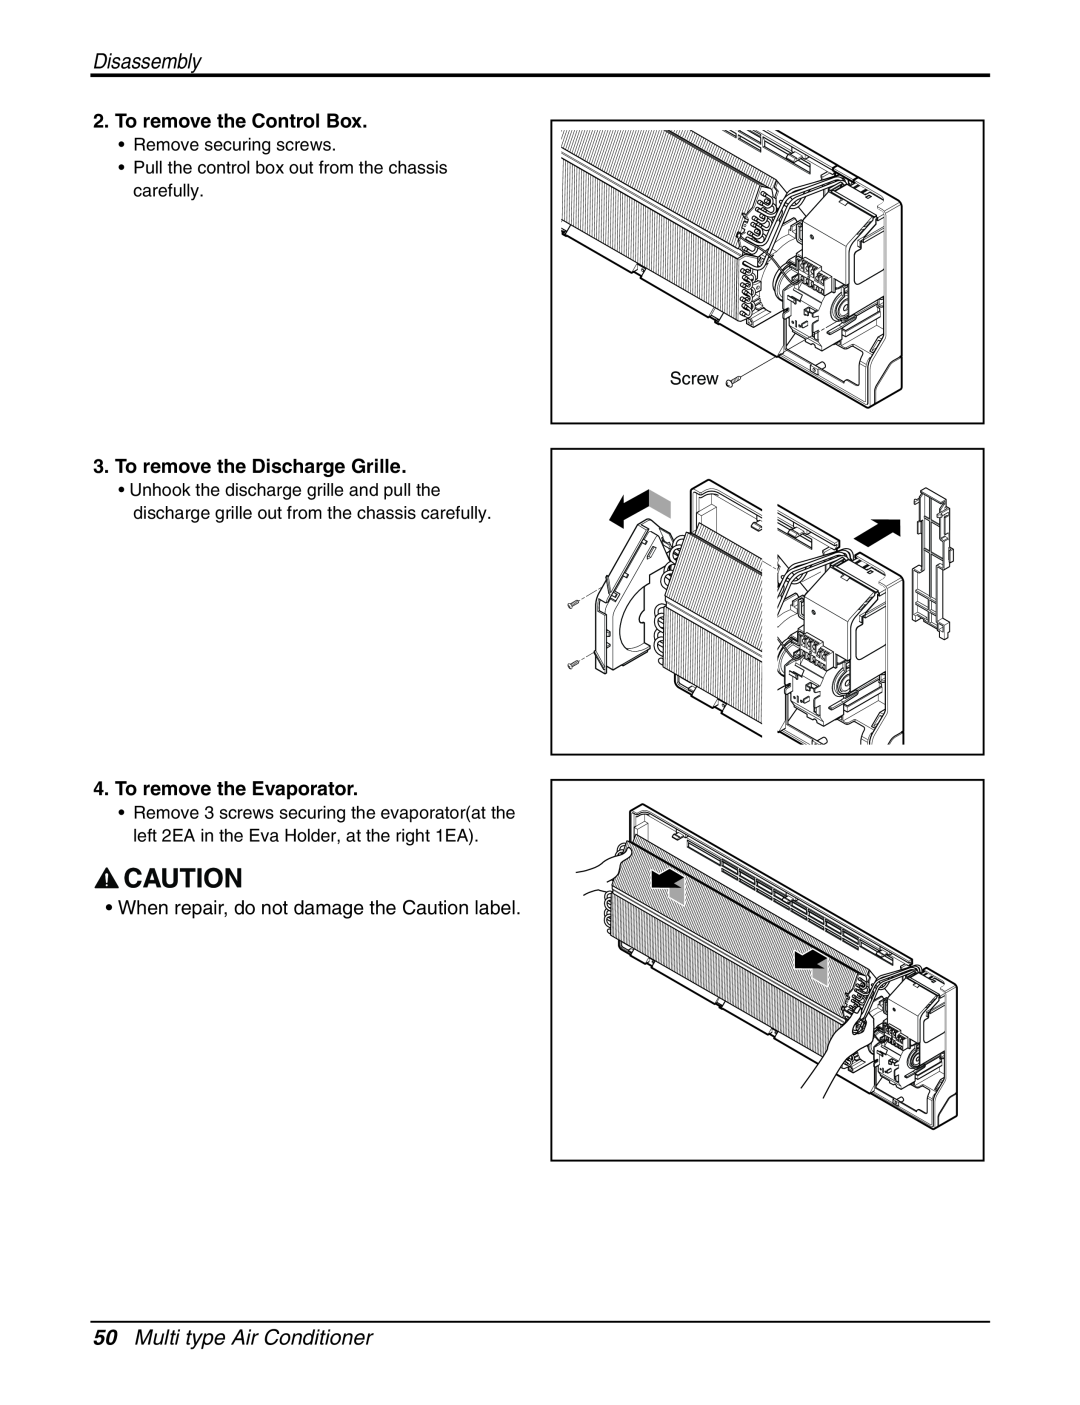 LG Electronics A2UC243FA0 (LMU240CE) service manual Multi type Air Conditioner, Disassembly, To remove the Control Box 